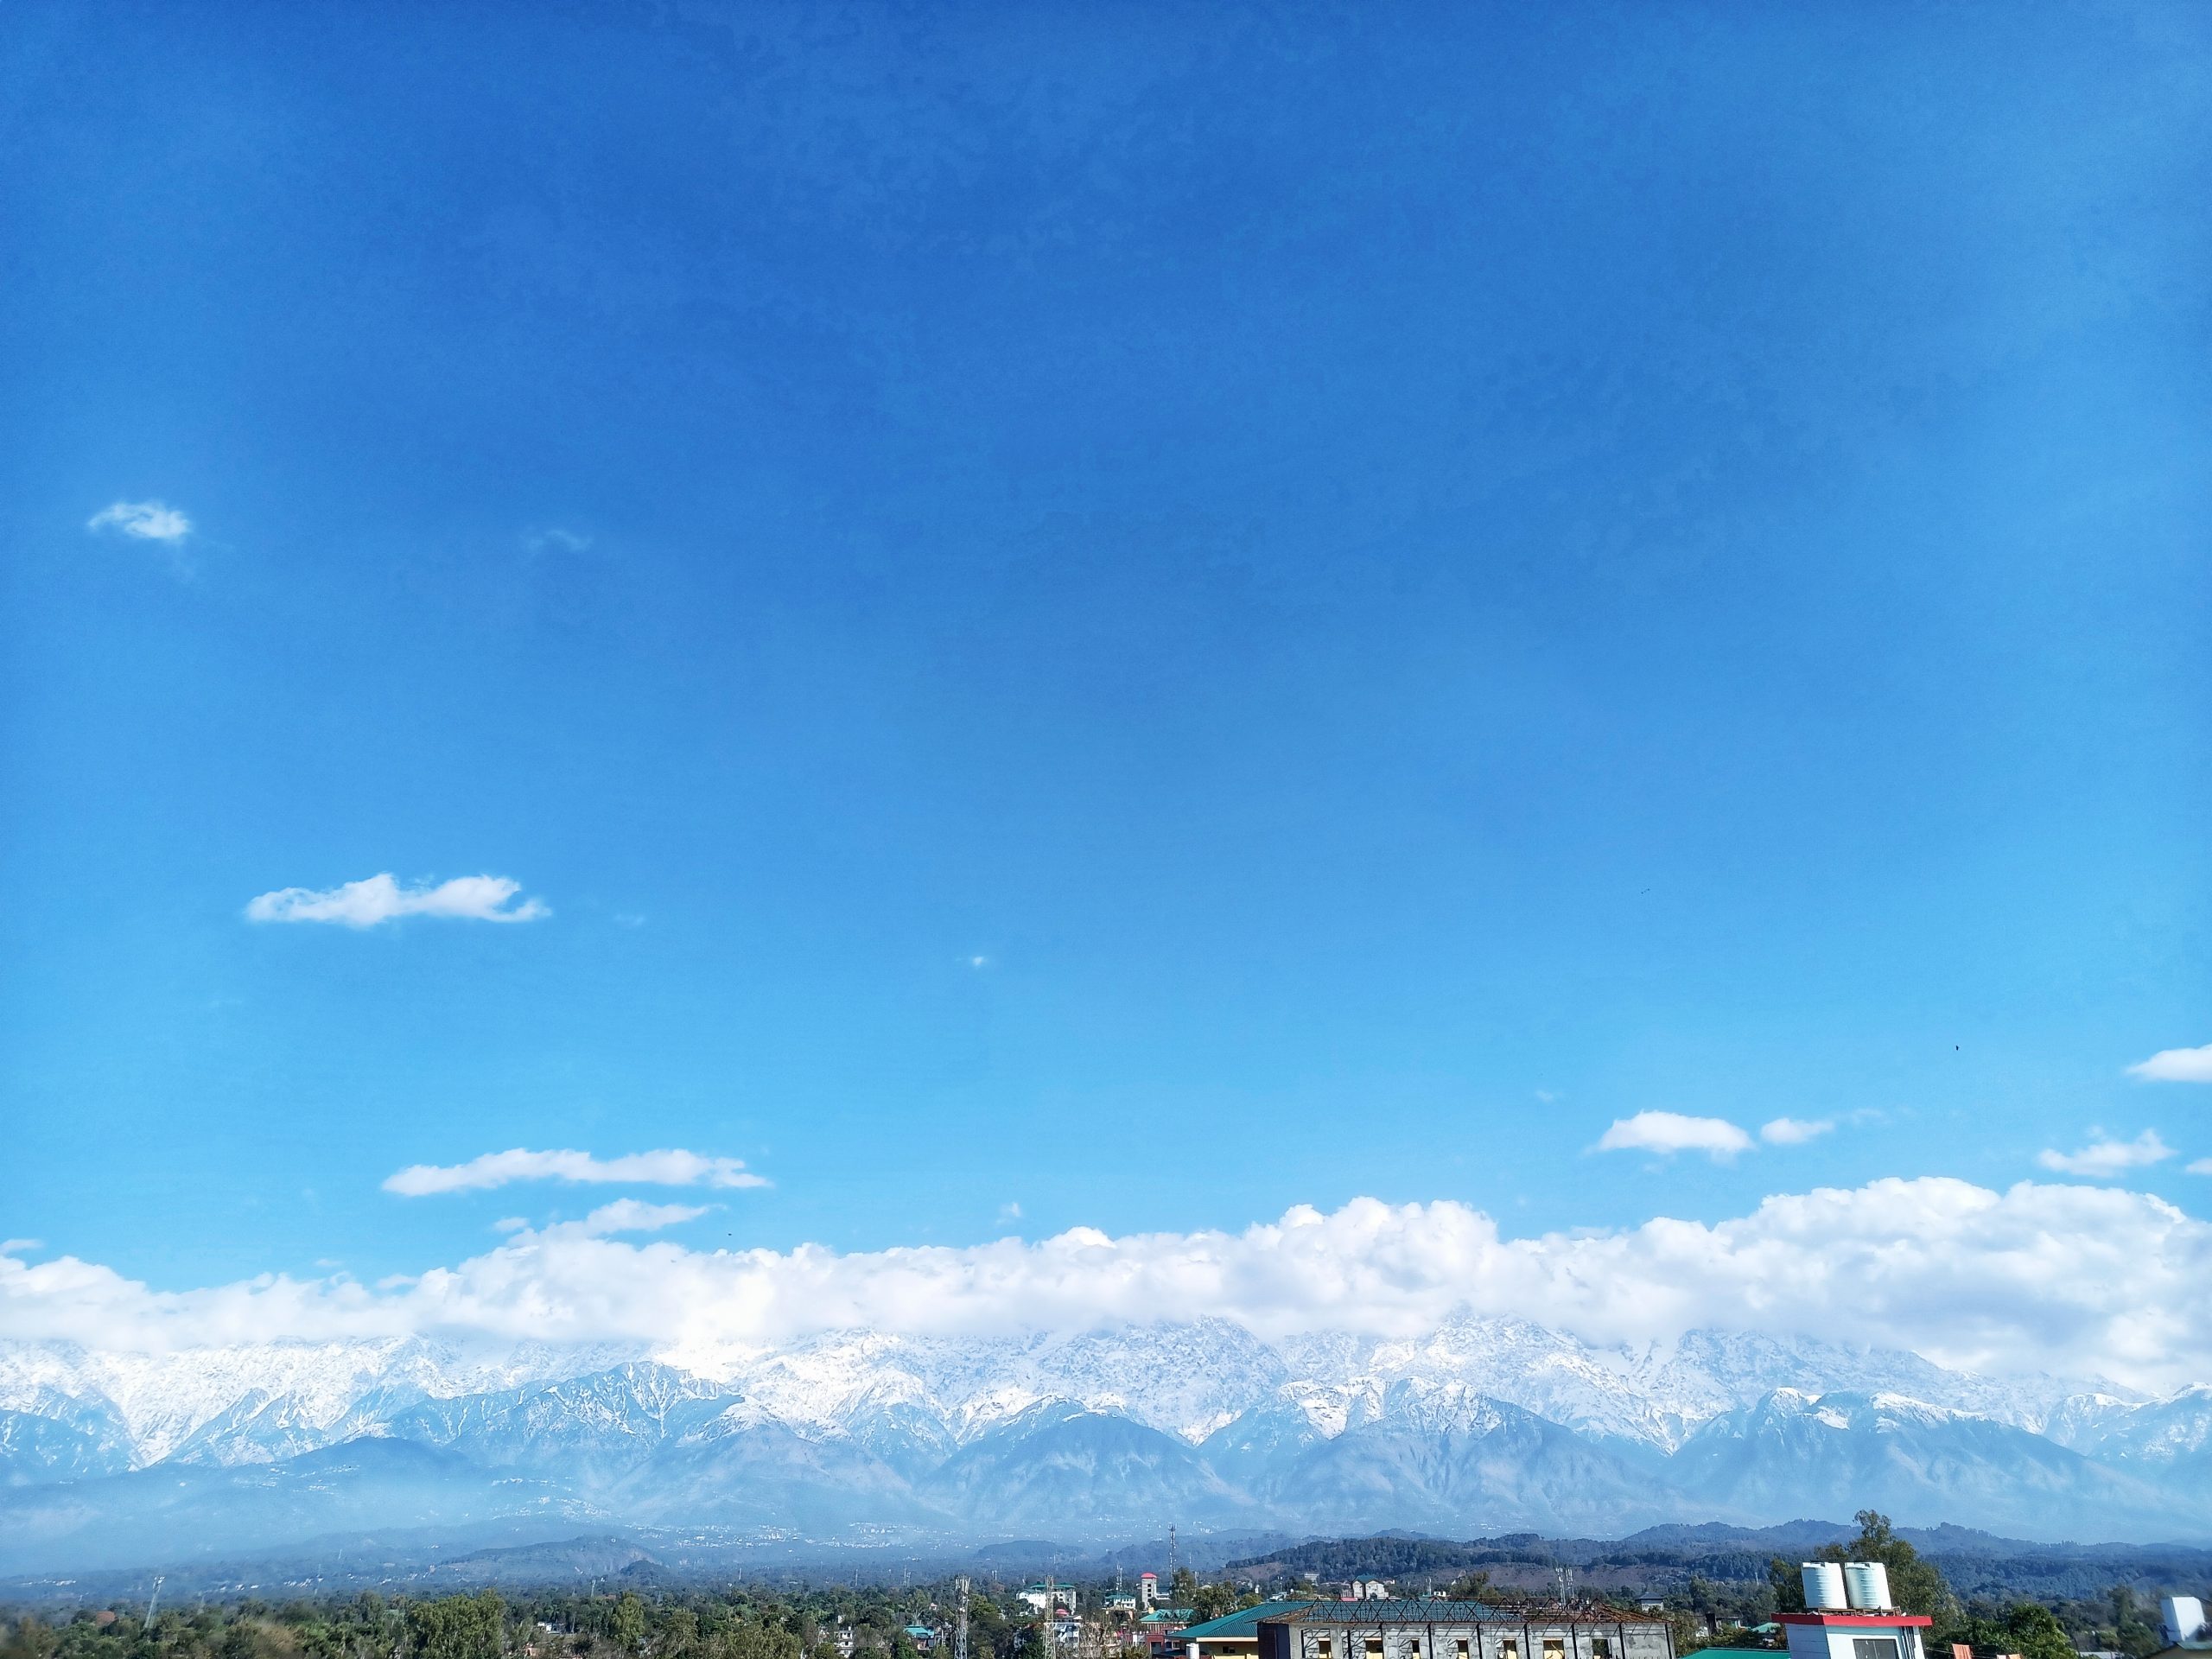 Sky and snowy mountains